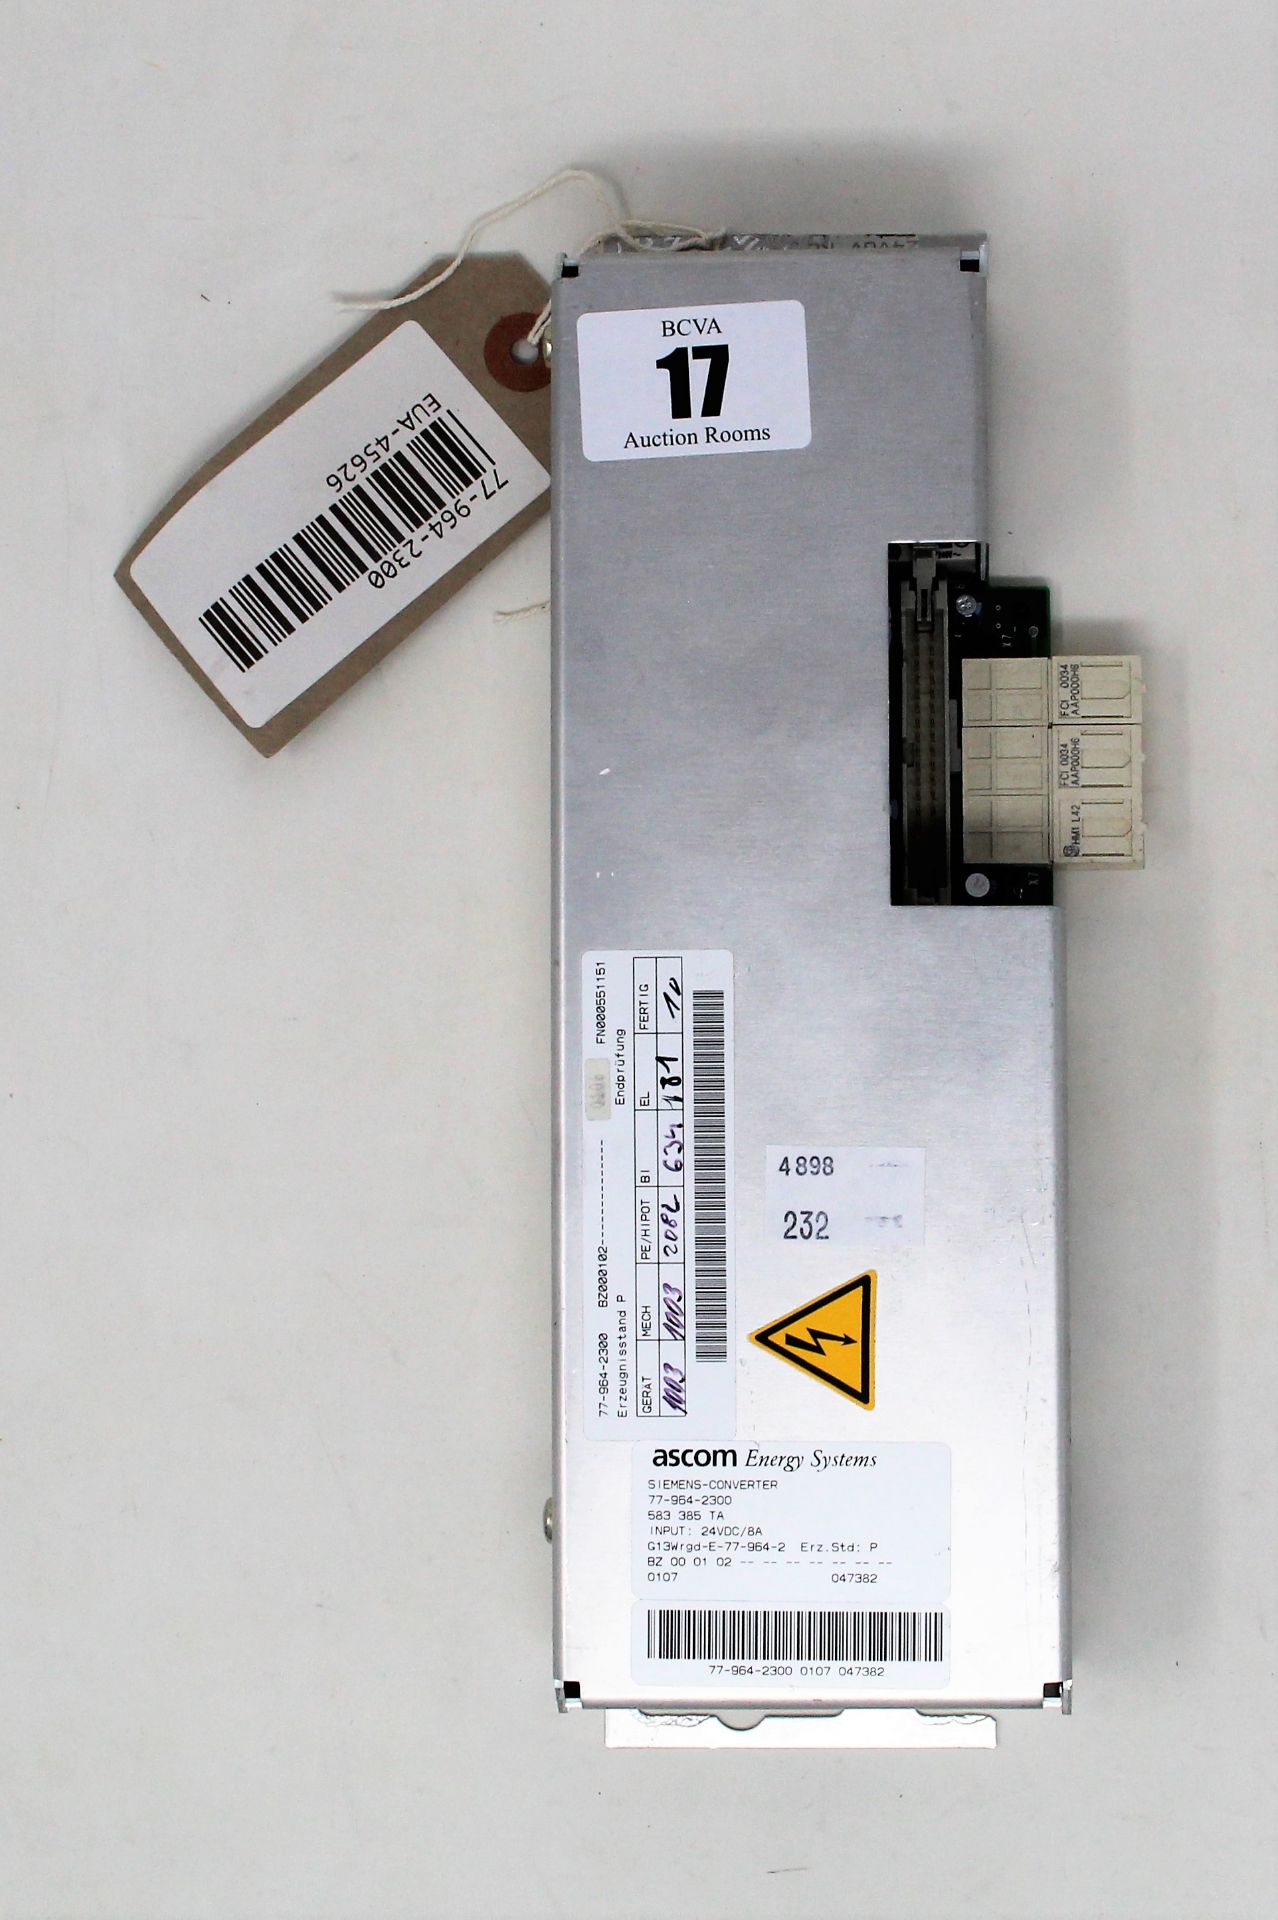 A pre-owned Siemens Ascom 77-964-2300 Converter Power Supply (Untested, sold as seen).